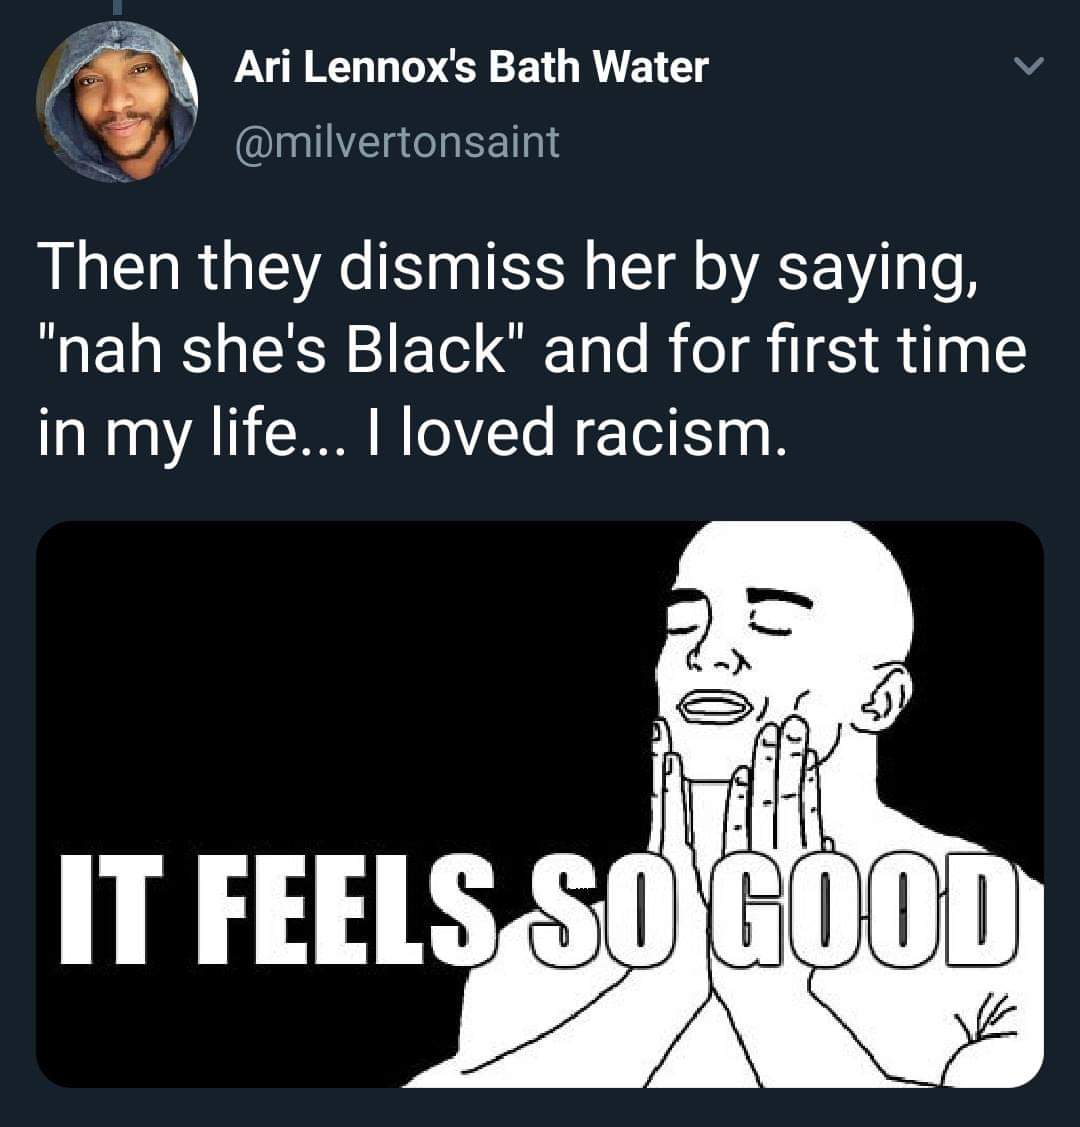 human behavior - Ari Lennox's Bath Water Then they dismiss her by saying, "nah she's Black" and for first time in my life... I loved racism. It Feels So Good